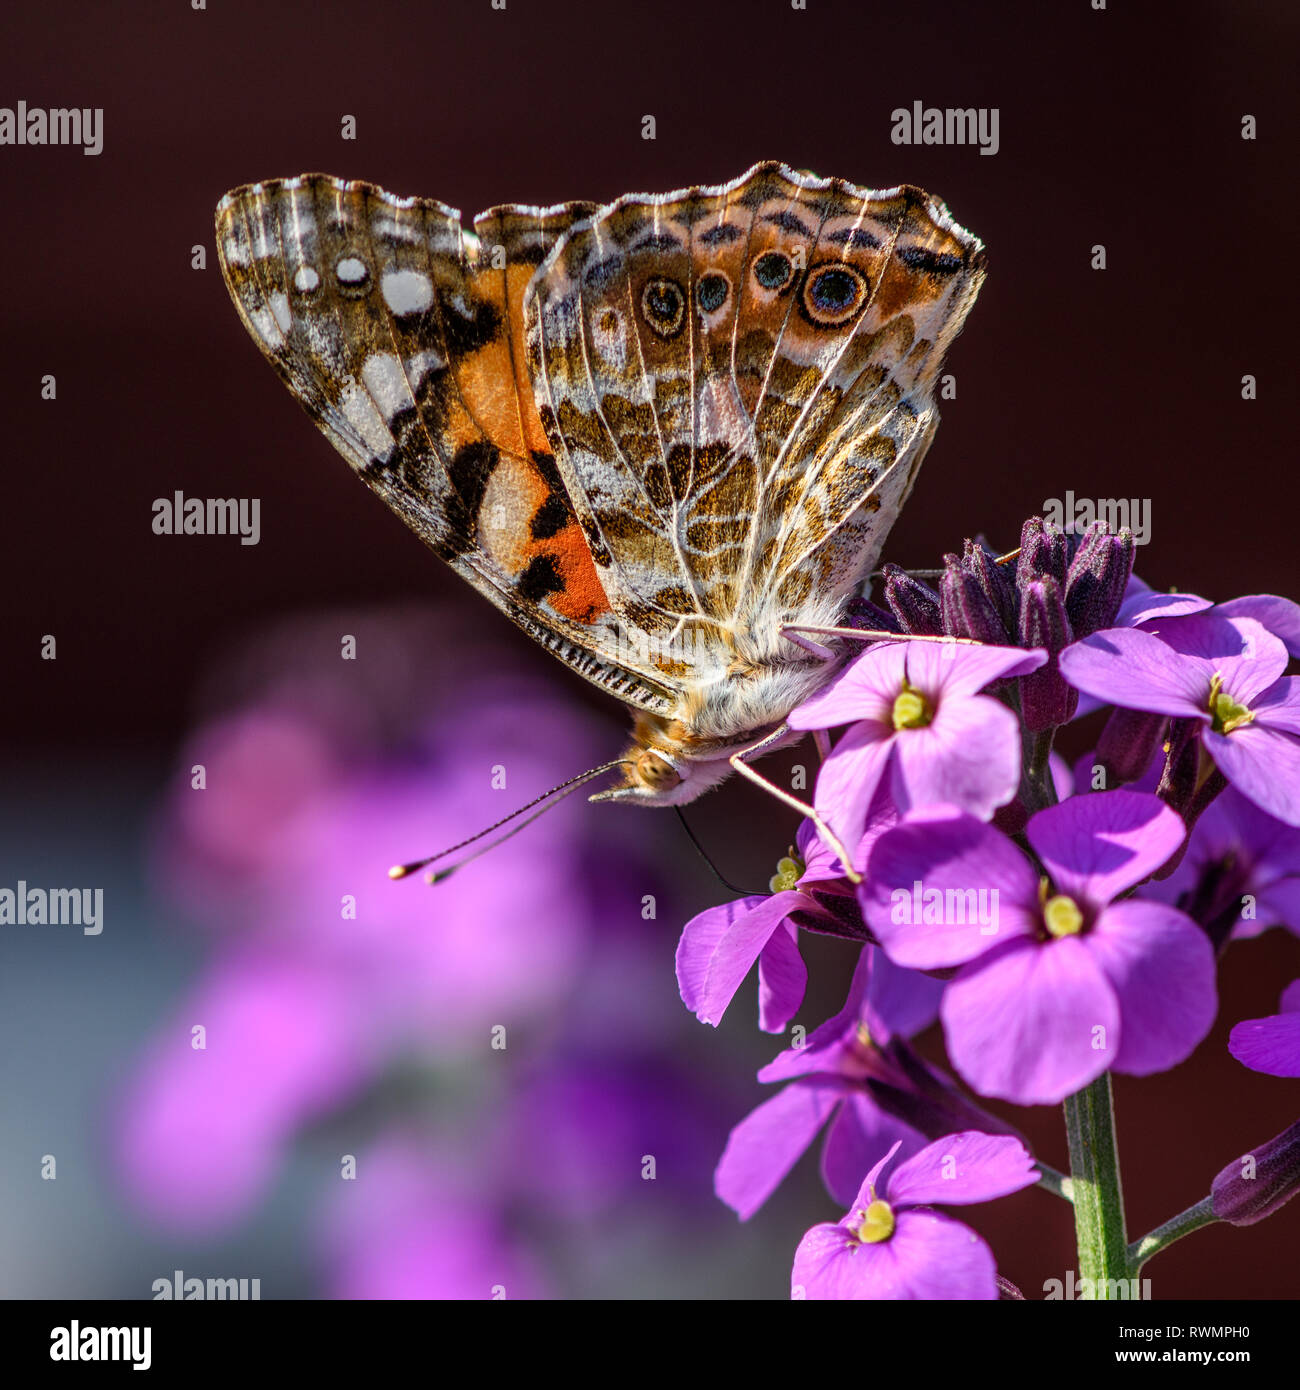 The Painted Lady butterfly on a purple flower of the Erysimum Bowles Mauve Stock Photo